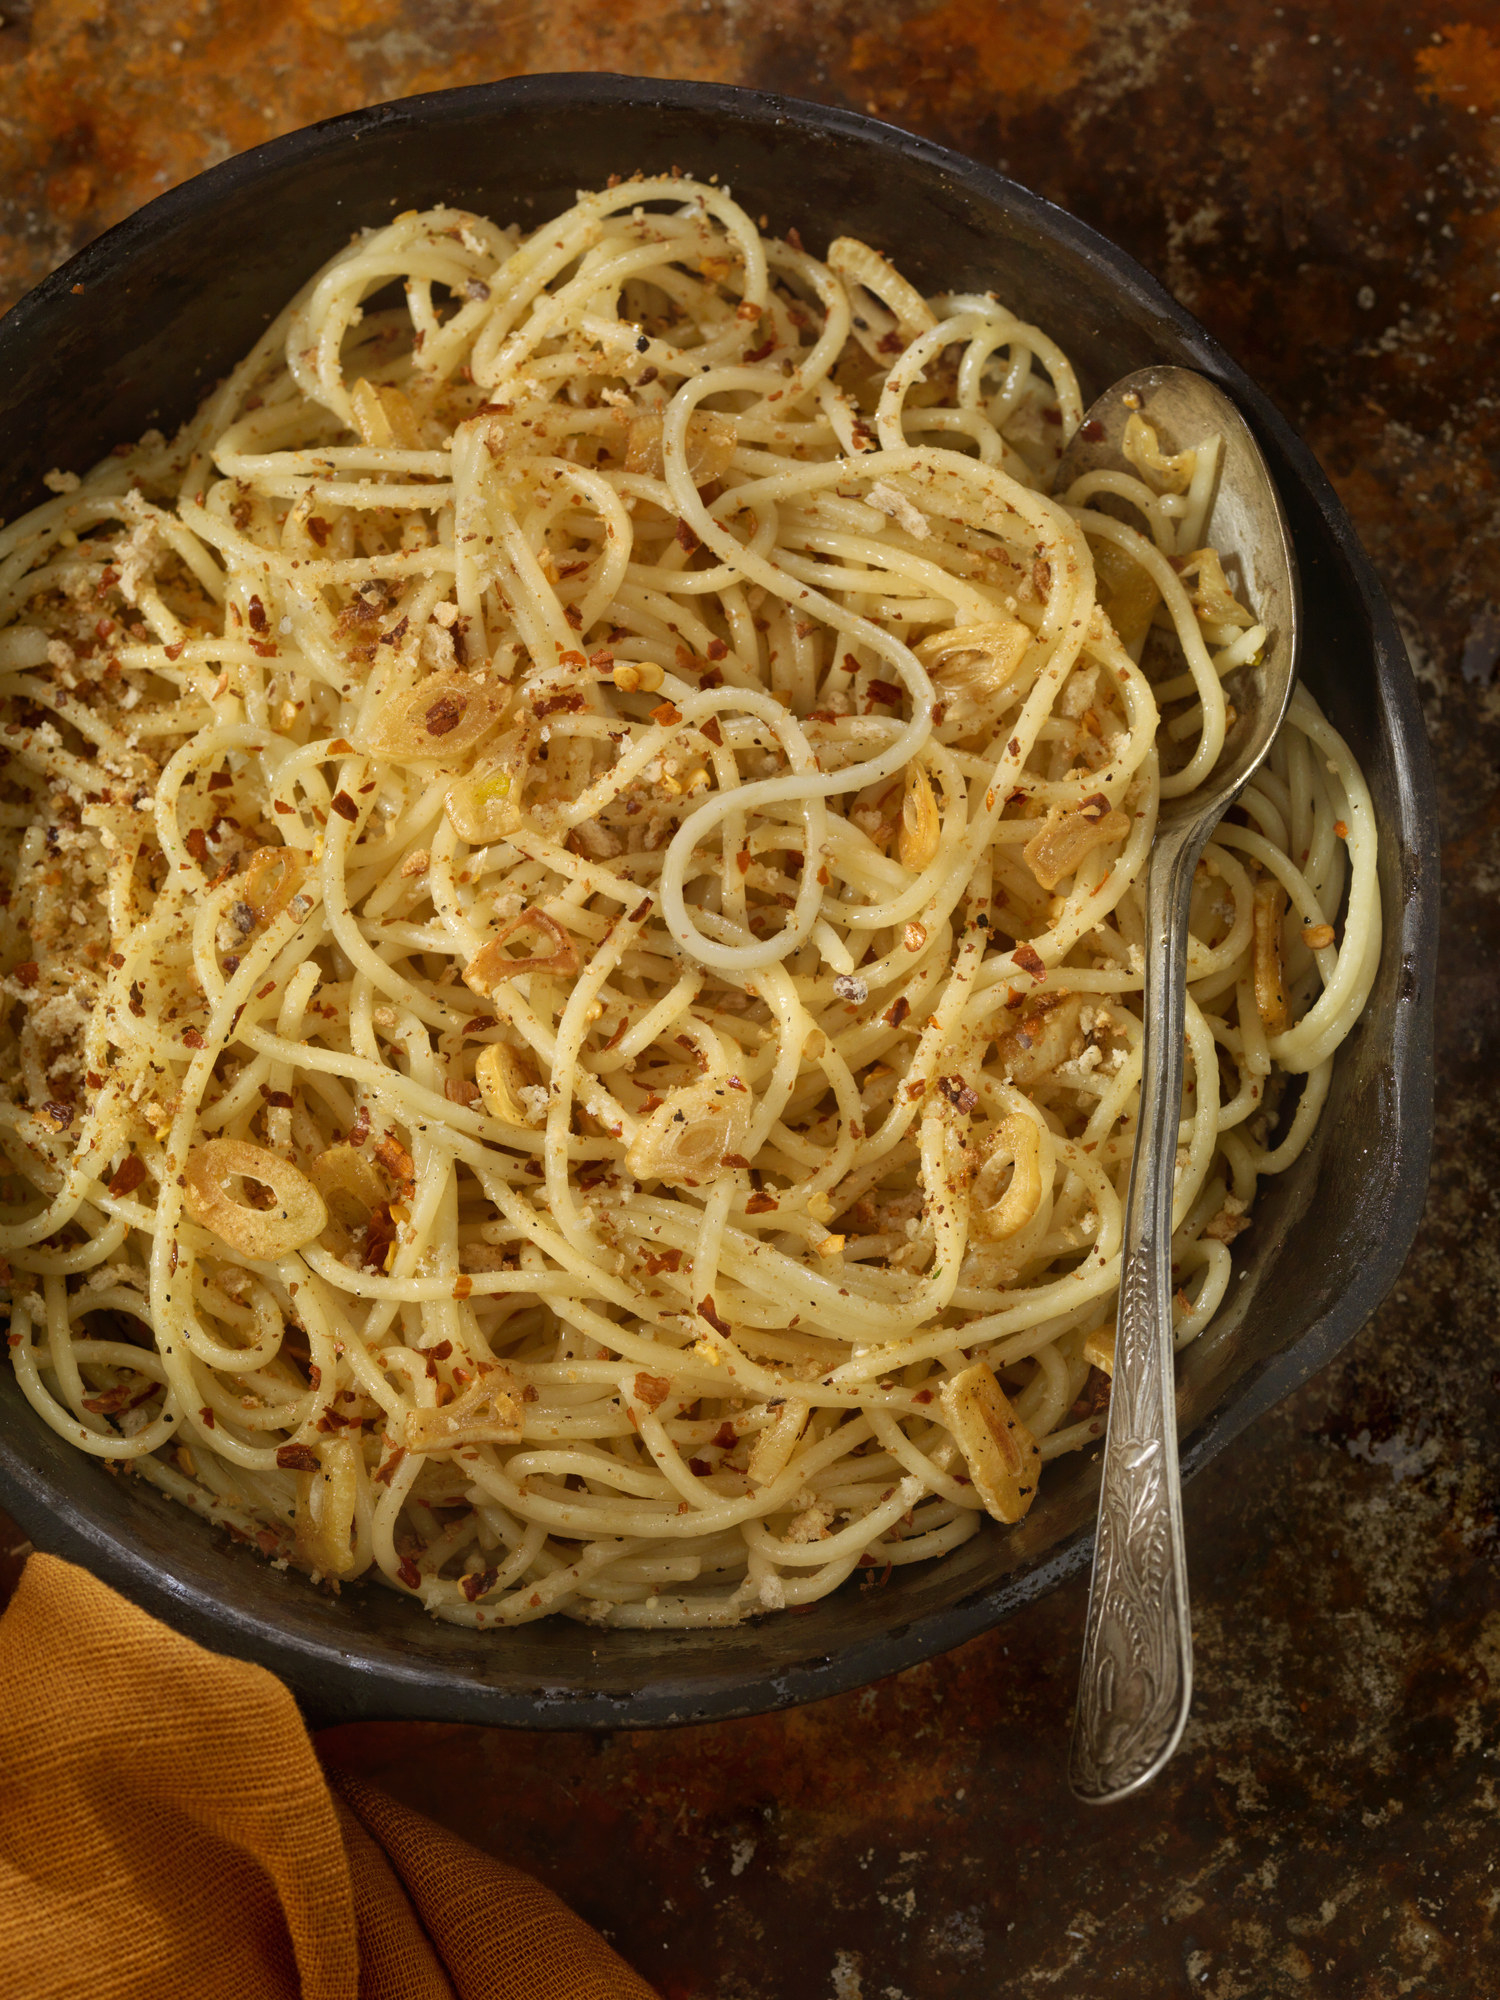 A skillet of spaghetti in garlic and oil.